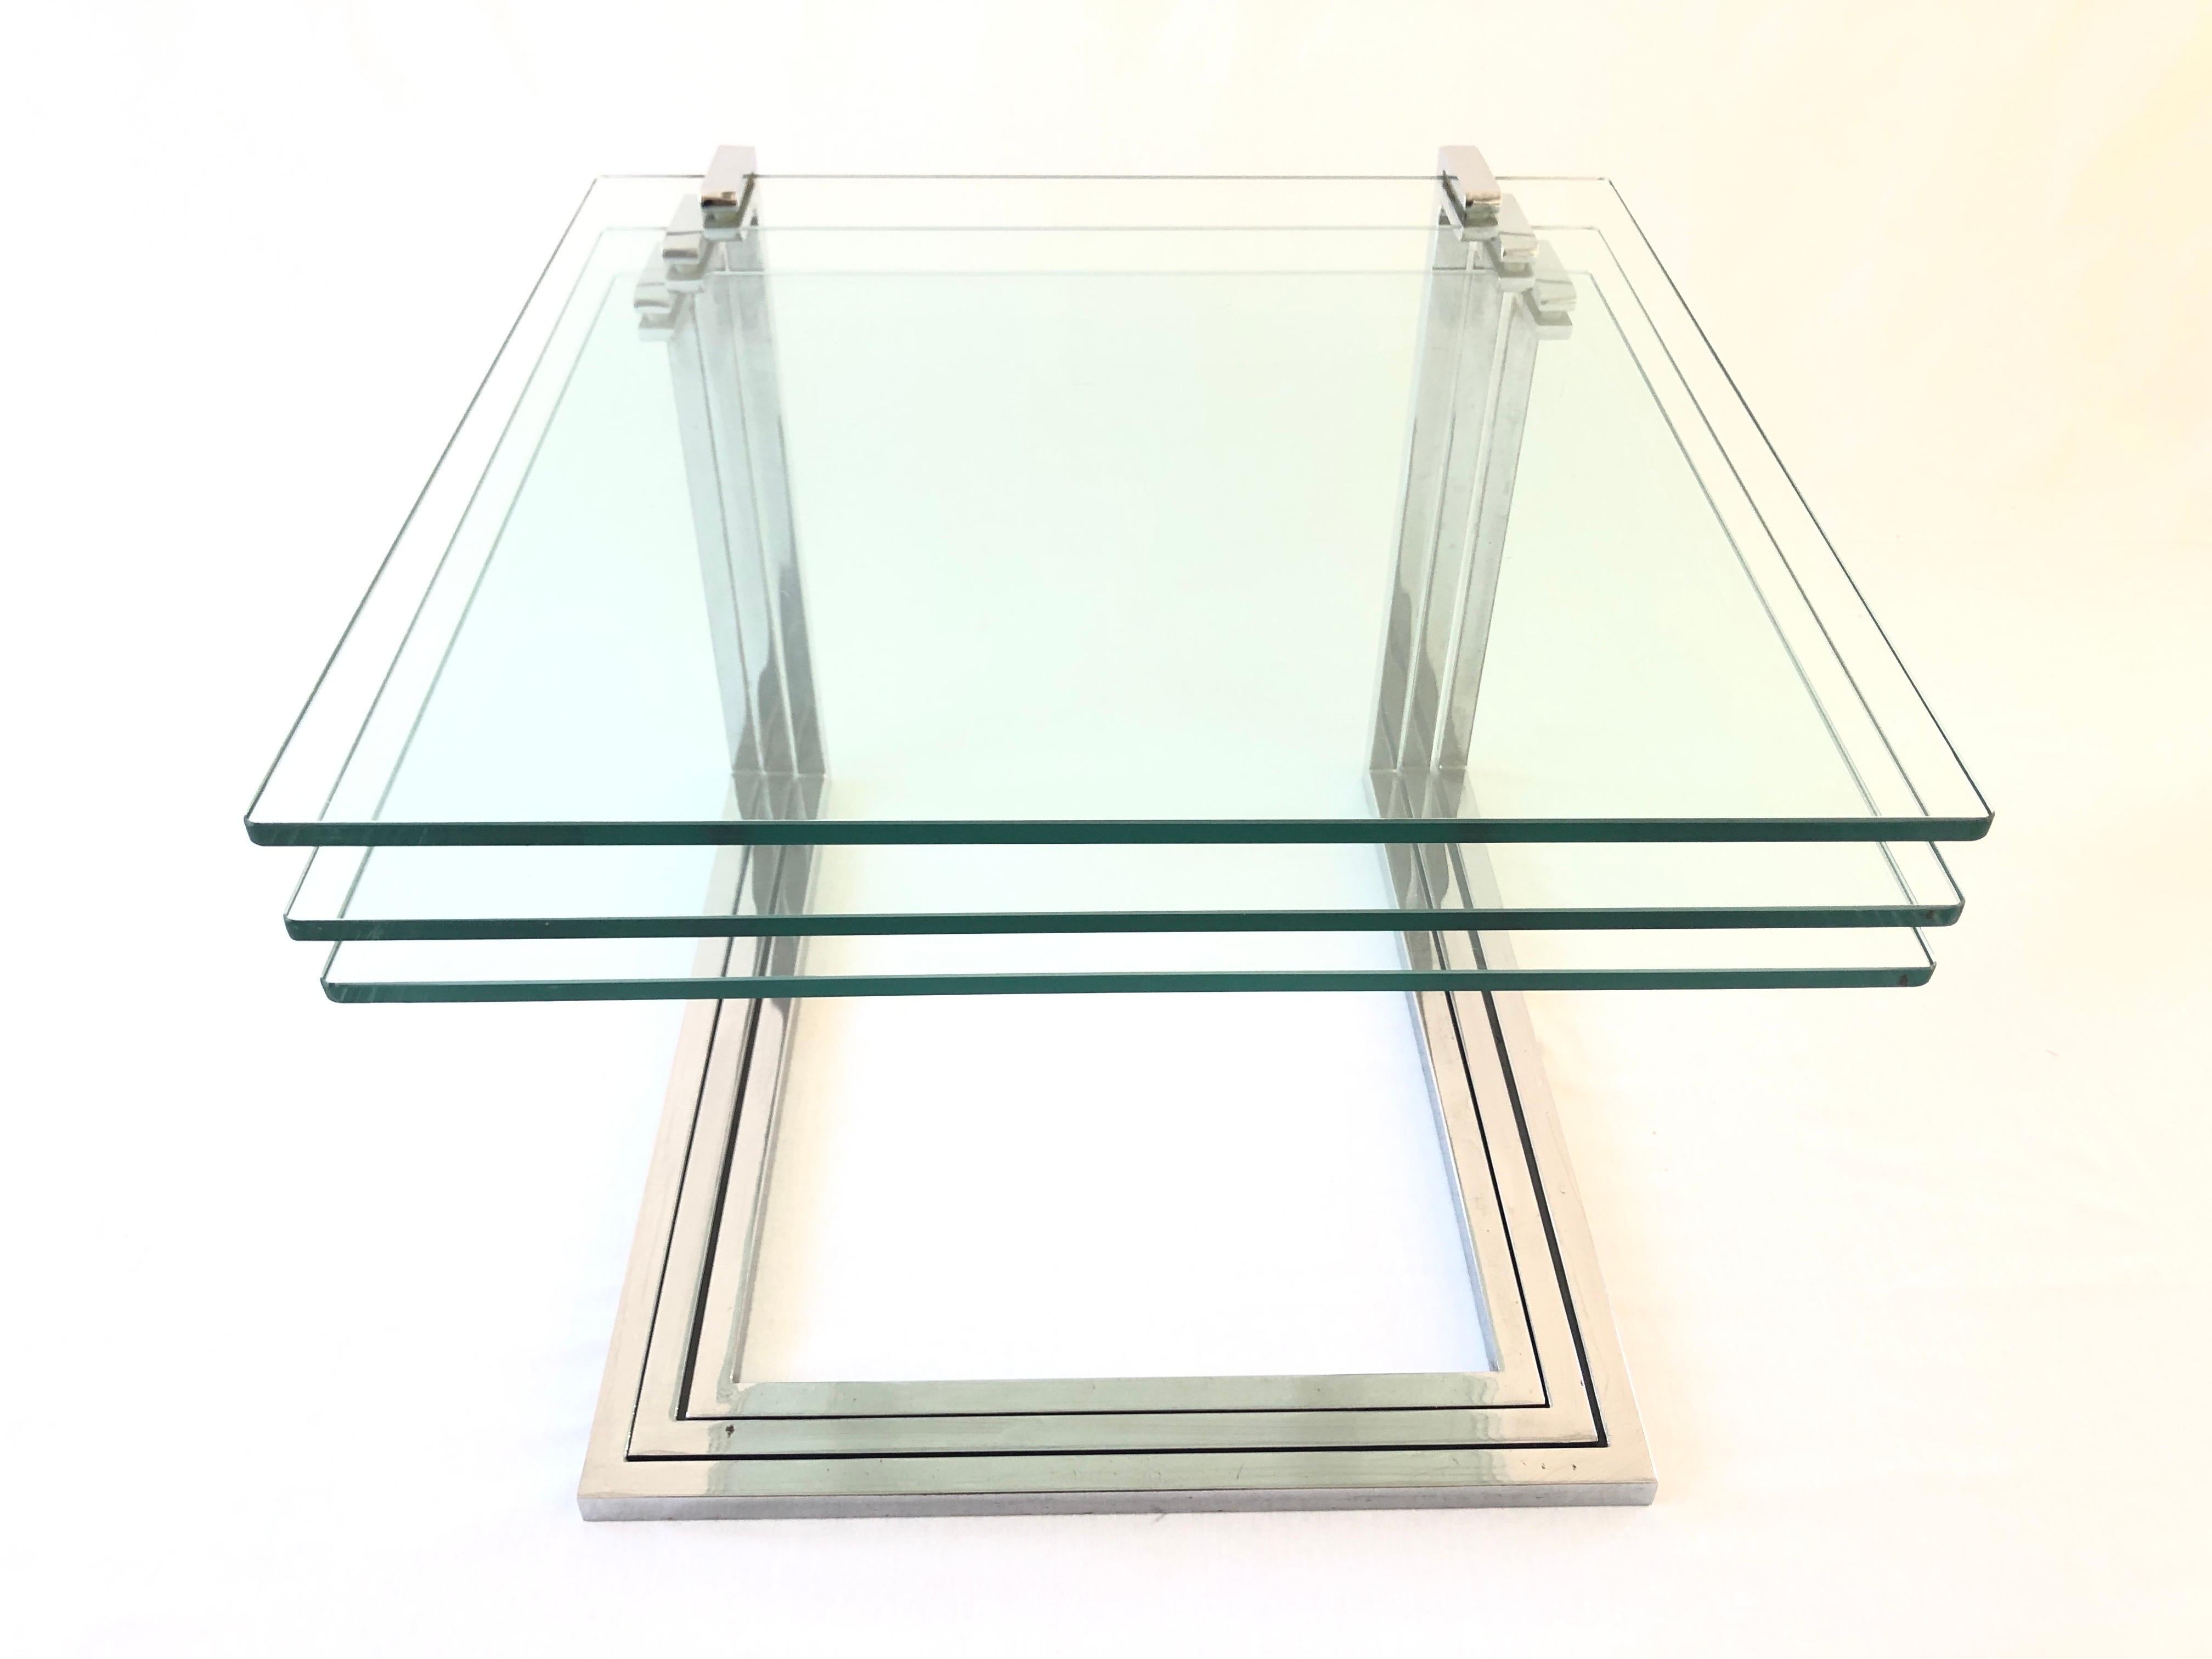 Late 20th Century Chrome and Thick Glass Set of 3 Nesting Tables, 1970s, Germany For Sale